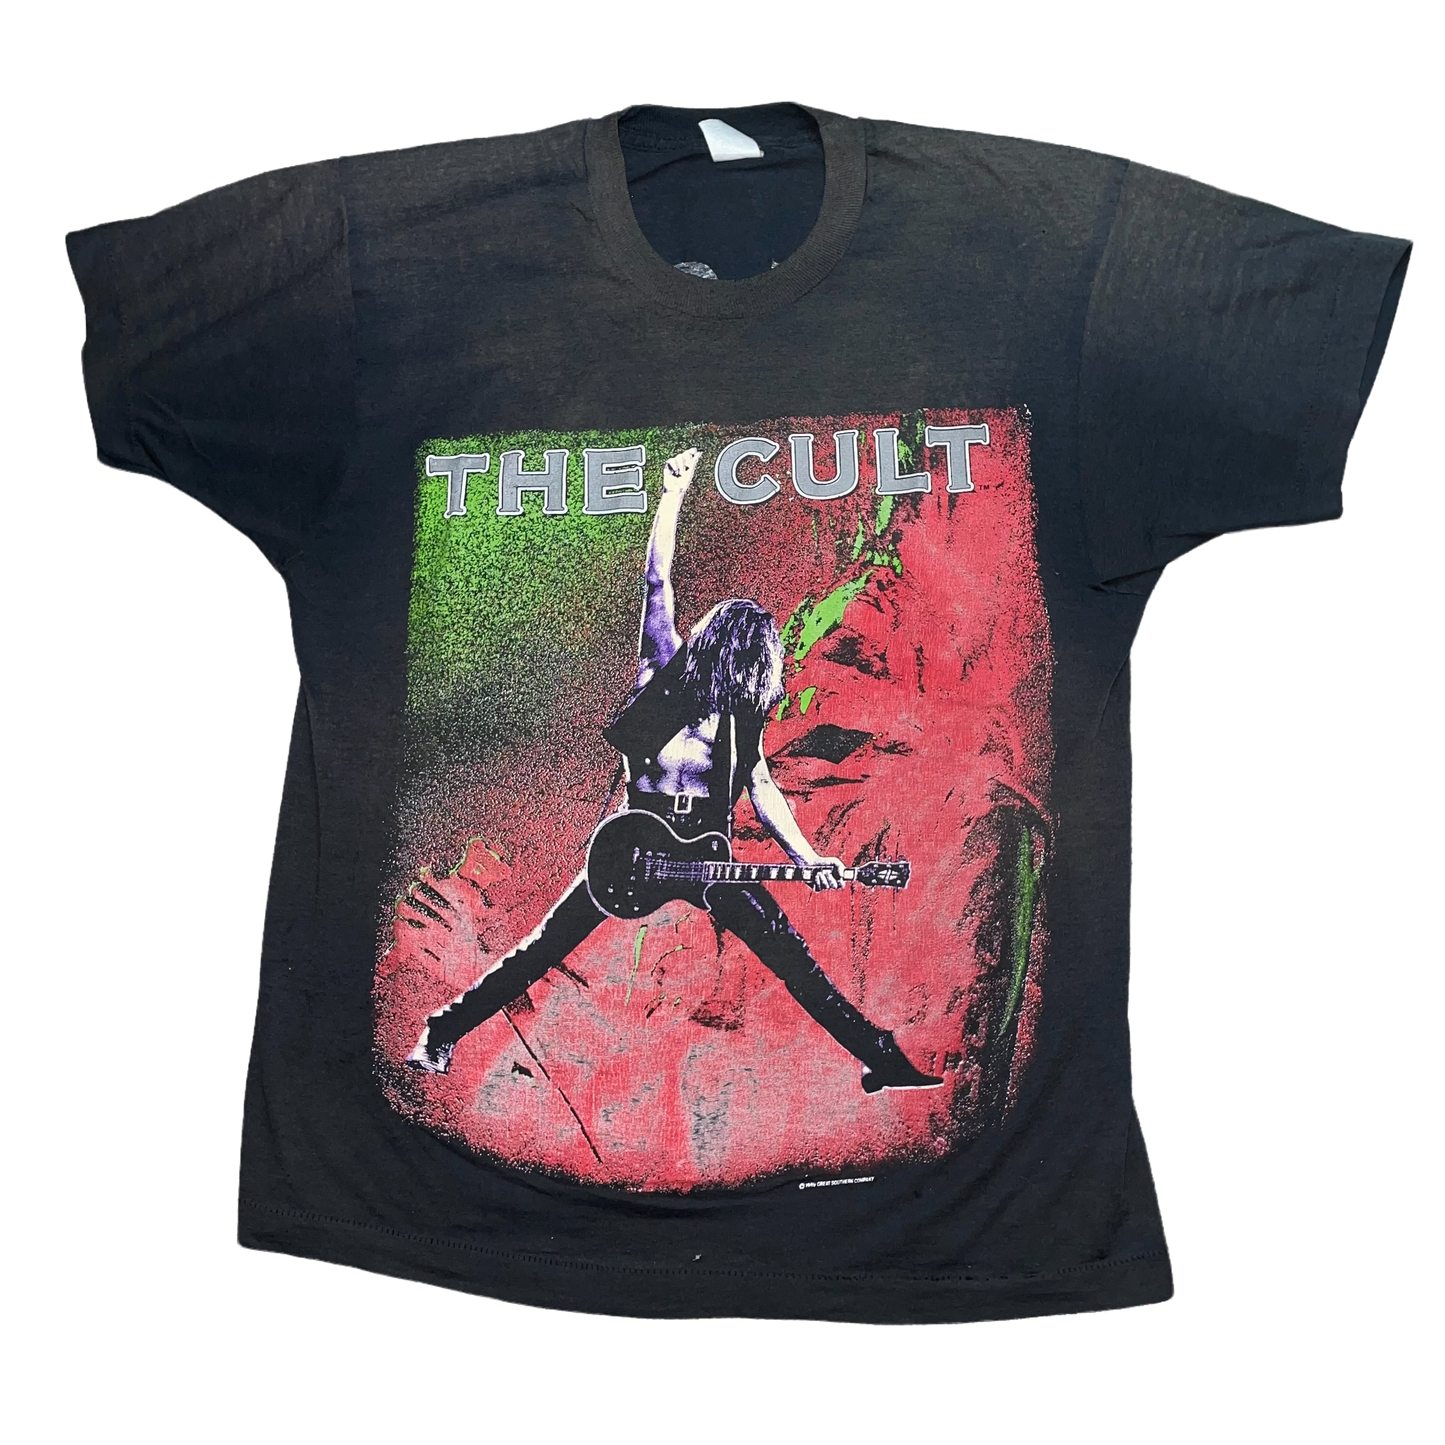 1989 The Cult "Sonic Temple" Graphic Tee